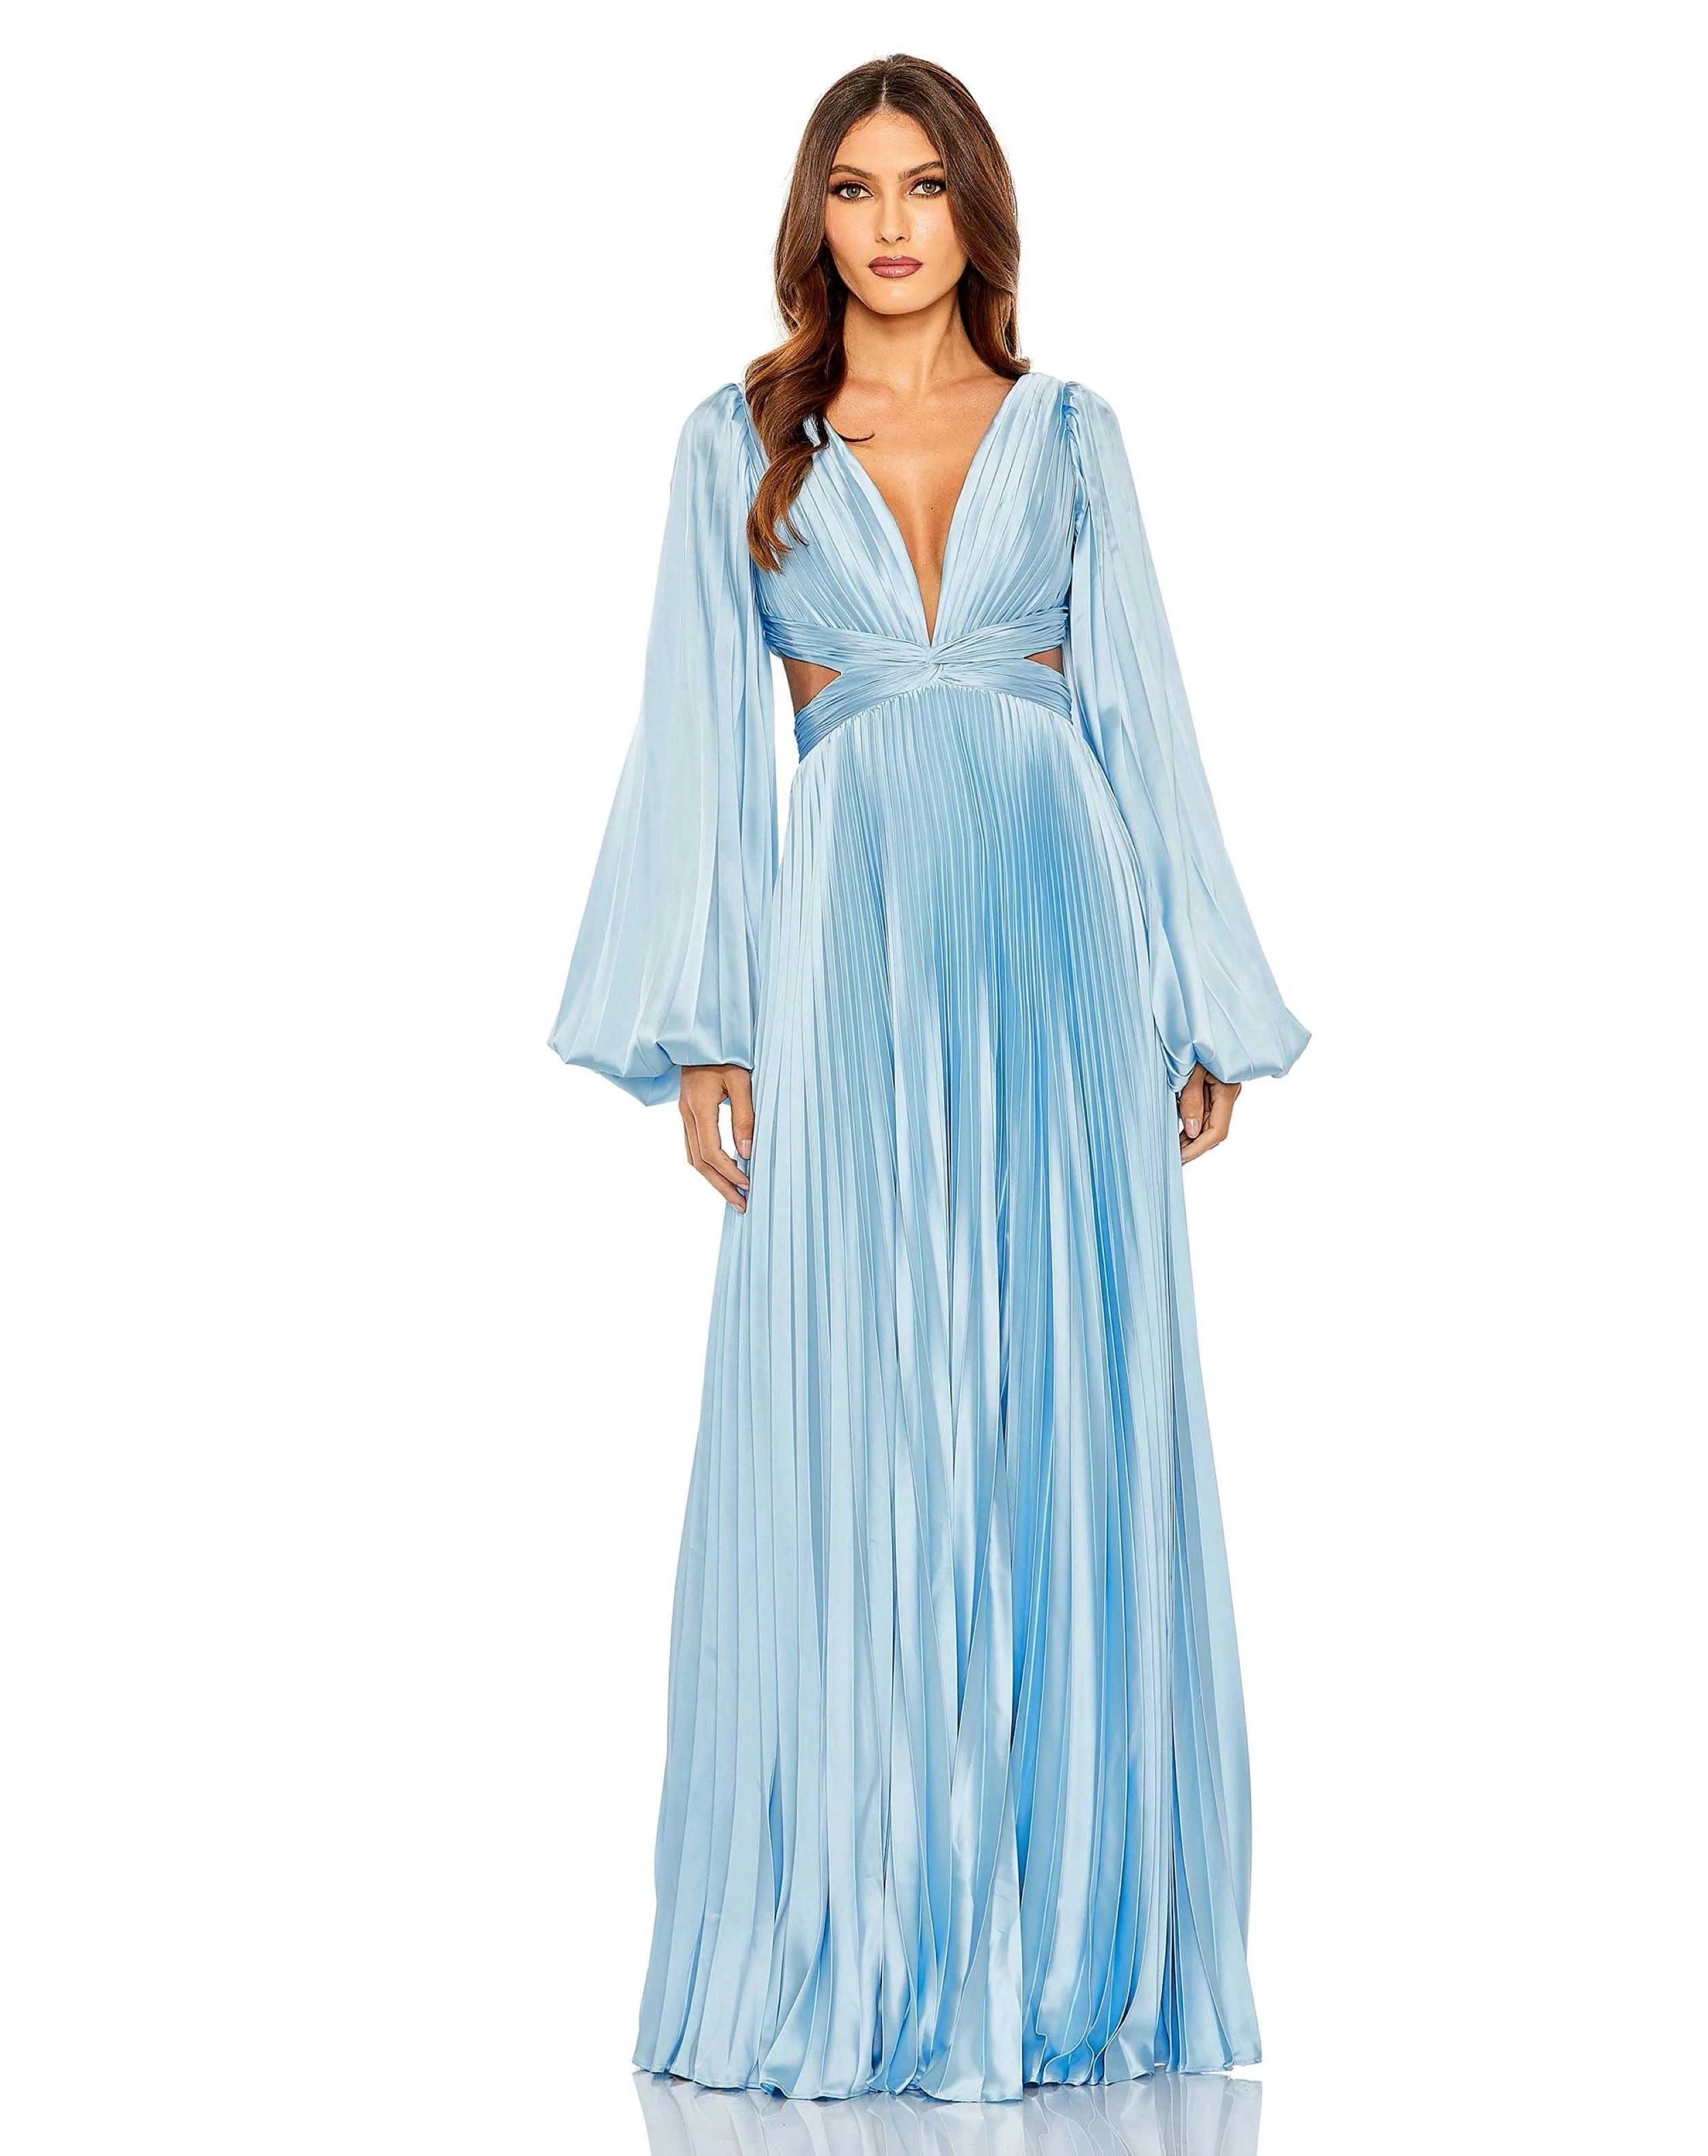 Elegant Powder Blue Cut Out Gown for Special Occasions | Image